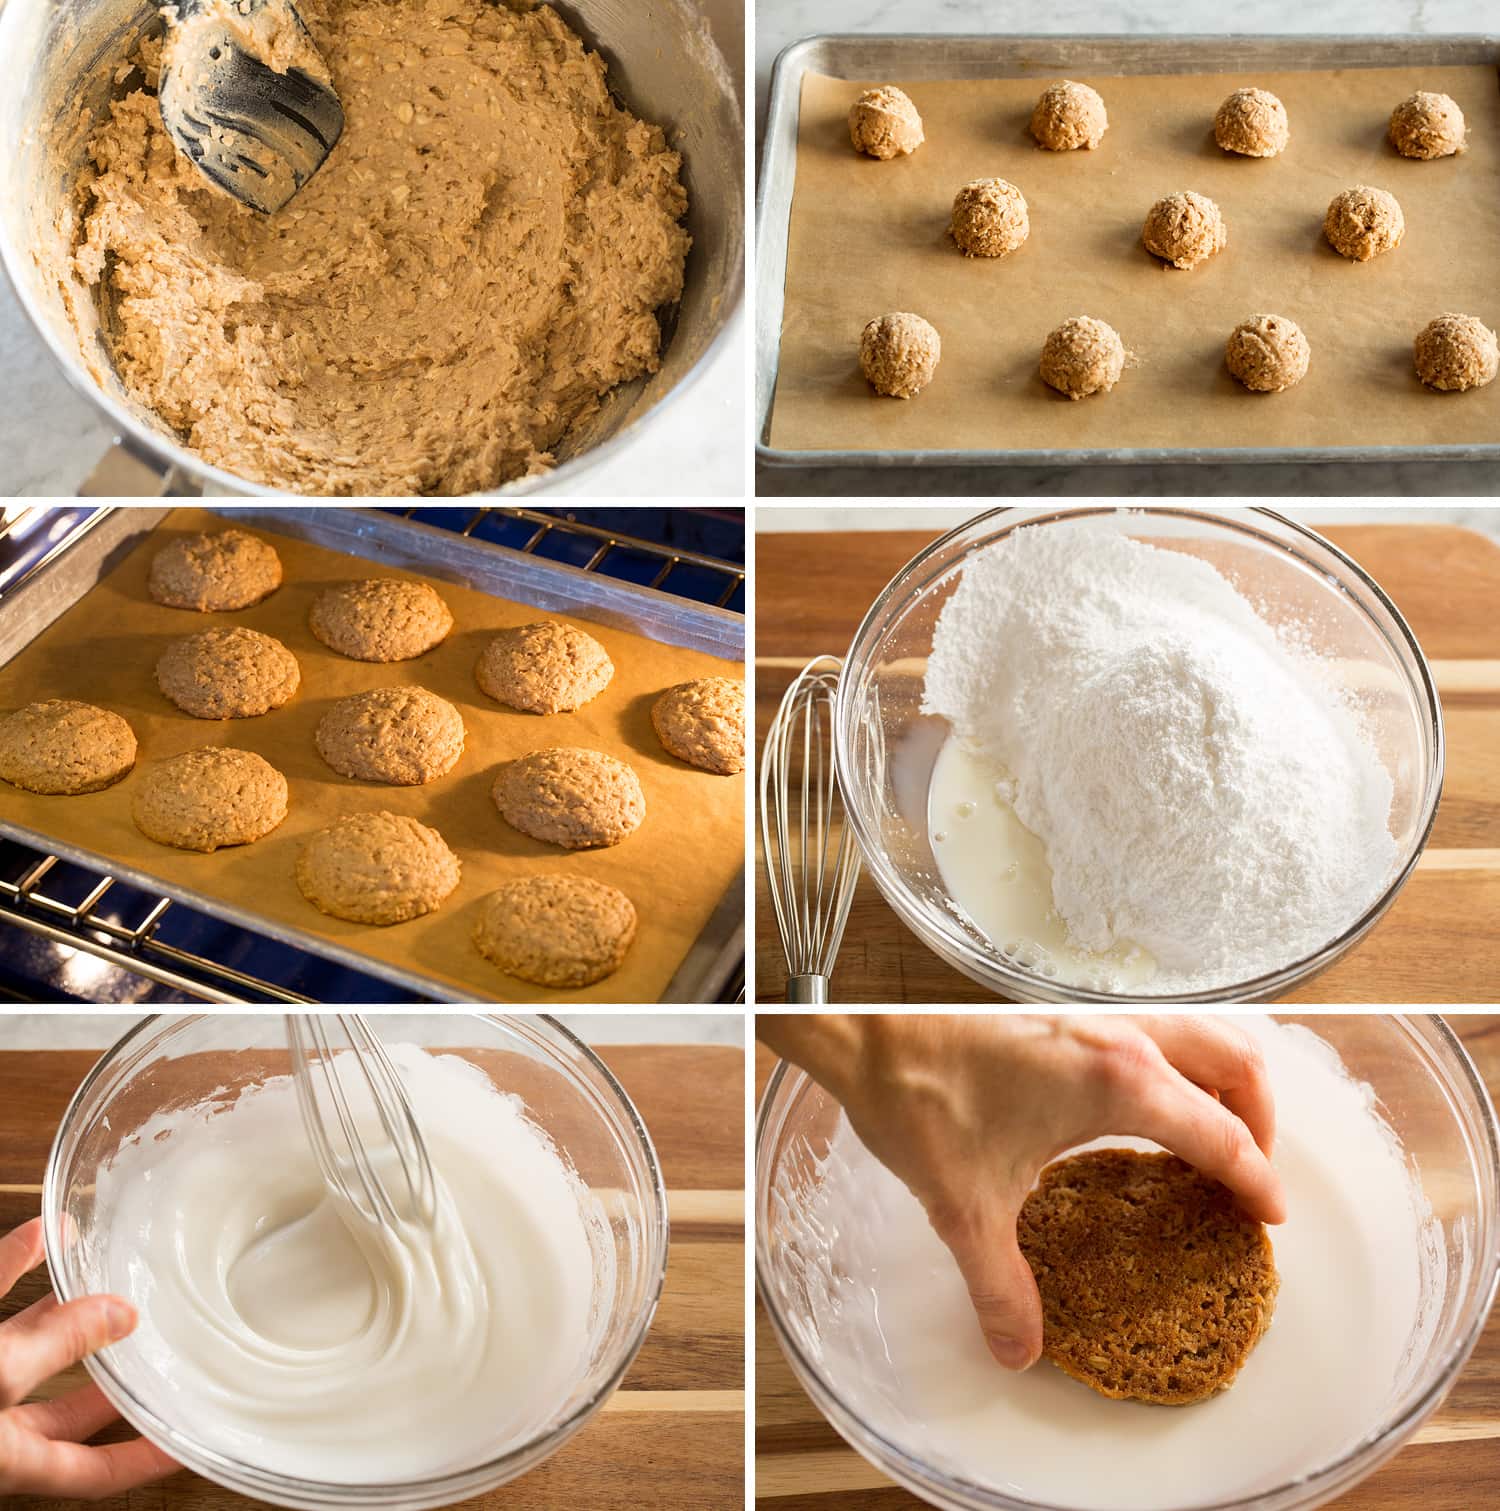 Steps for shaping, baking and icing oatmeal cookies.